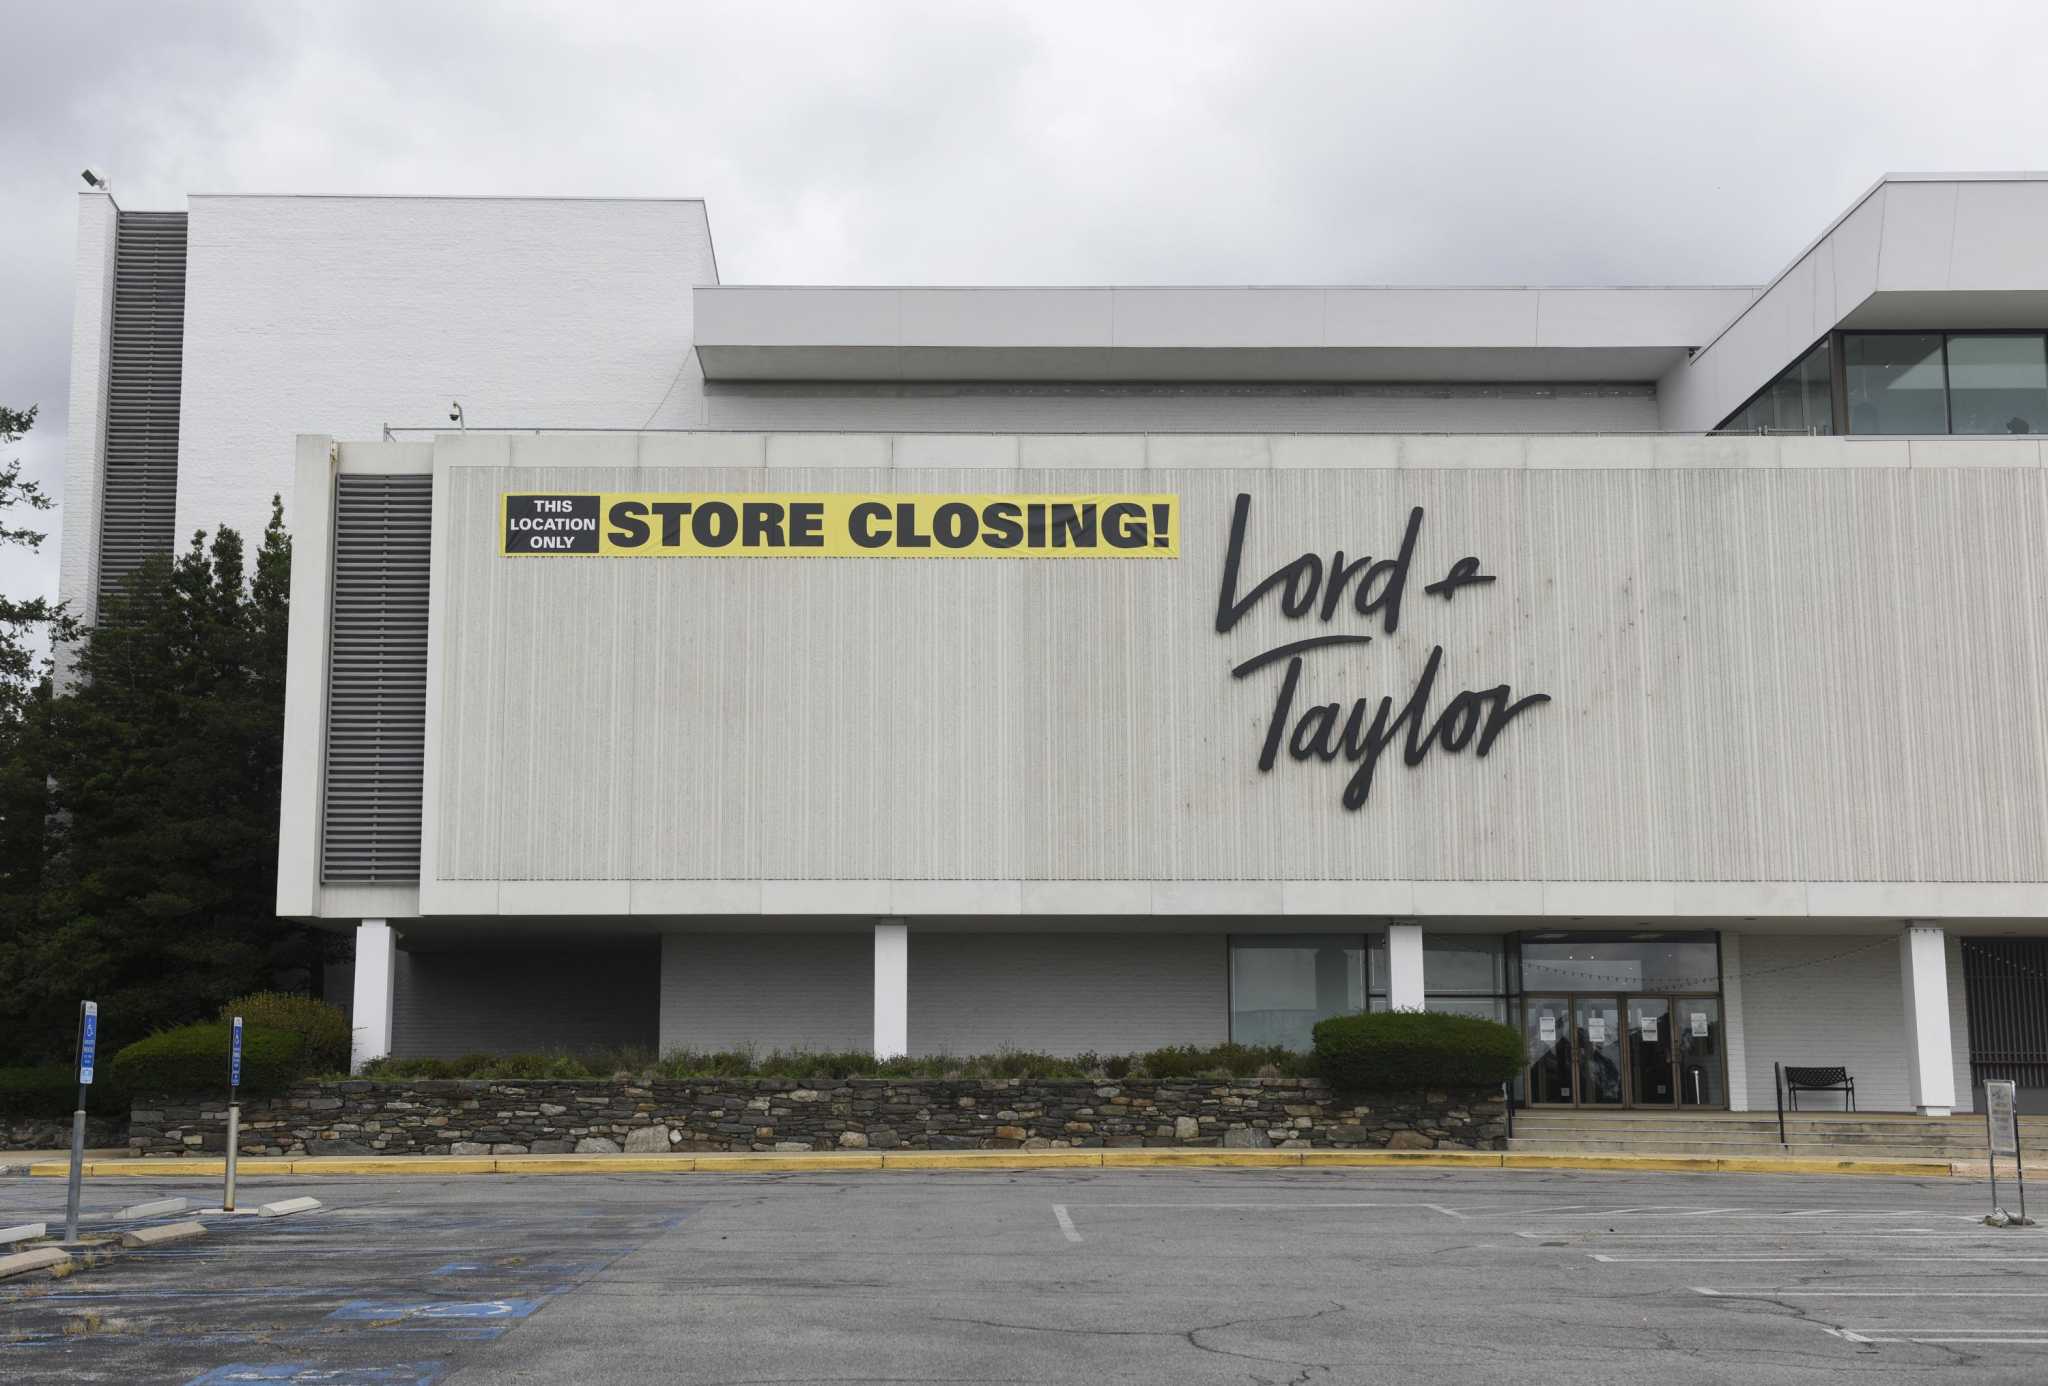 Lord and Taylor, The Lord and Taylor store in the Collectio…